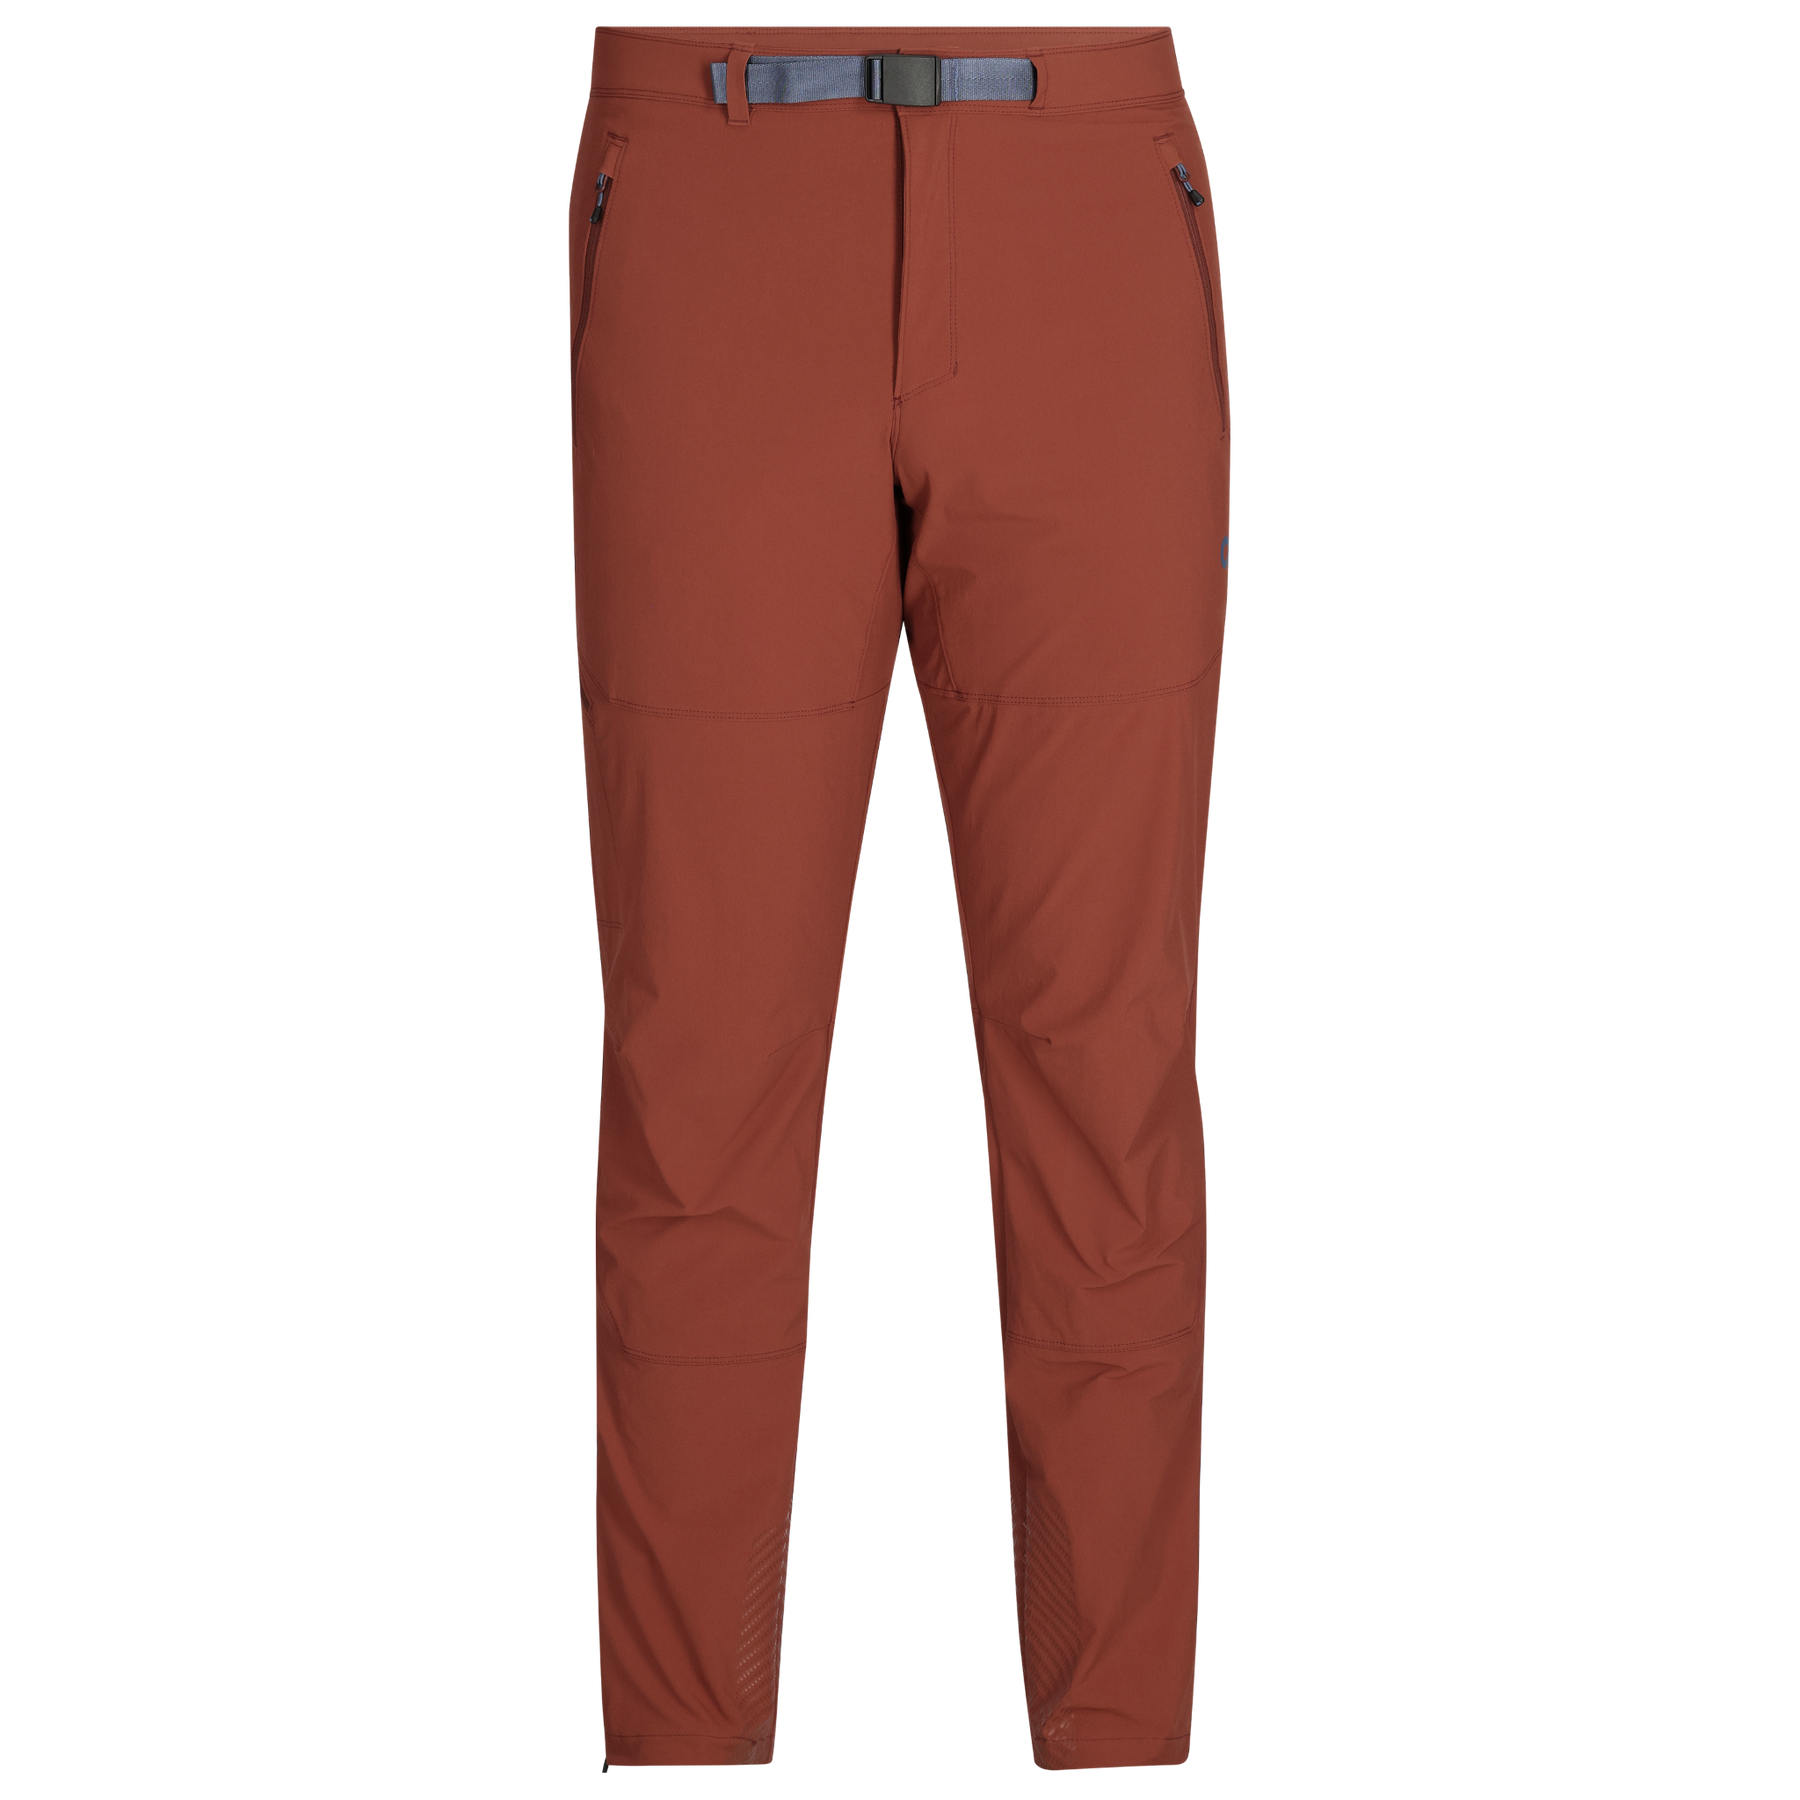 Outdoor Research Cirque Lite Pants - Athletic apparel